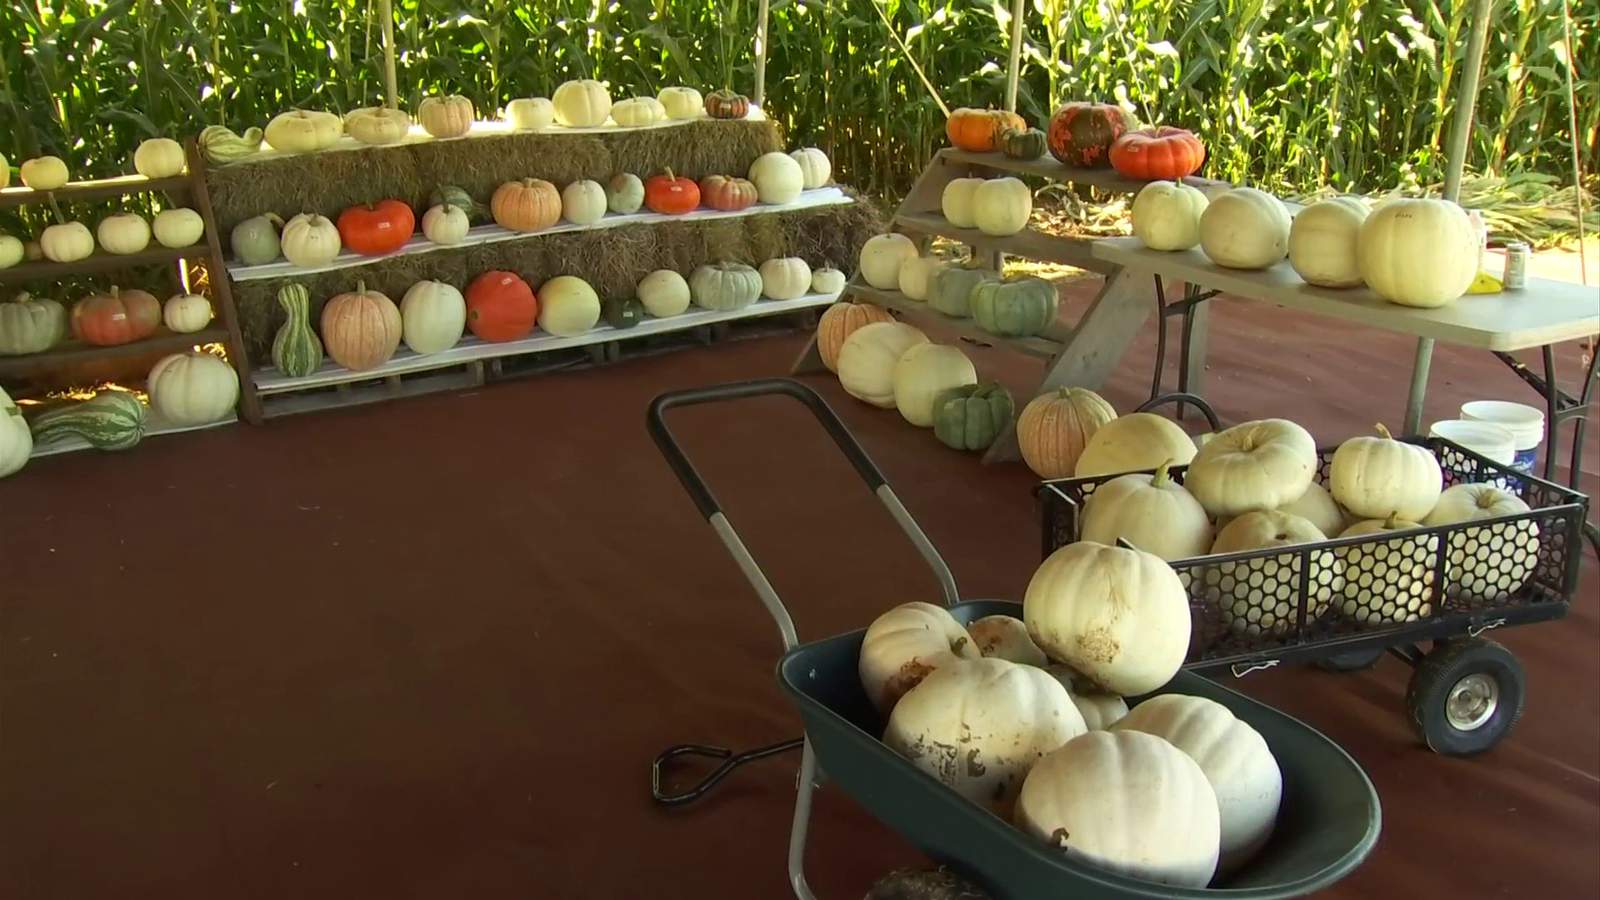 Enjoy all things fall at Yoders’ Farm in Campbell County